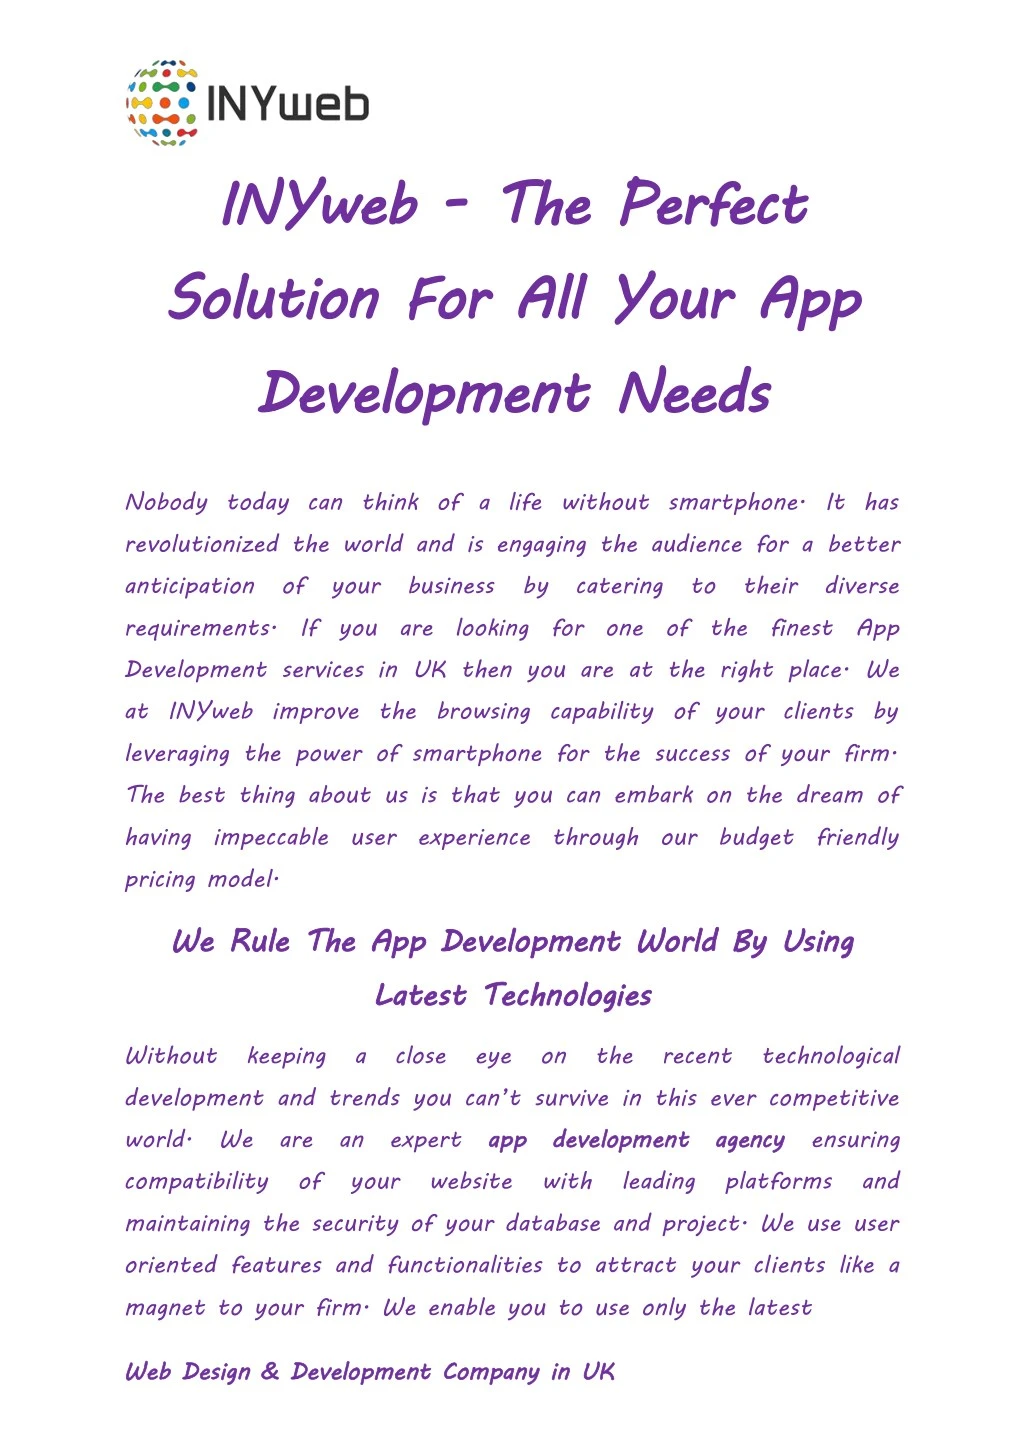 inyweb solution for all your app development needs